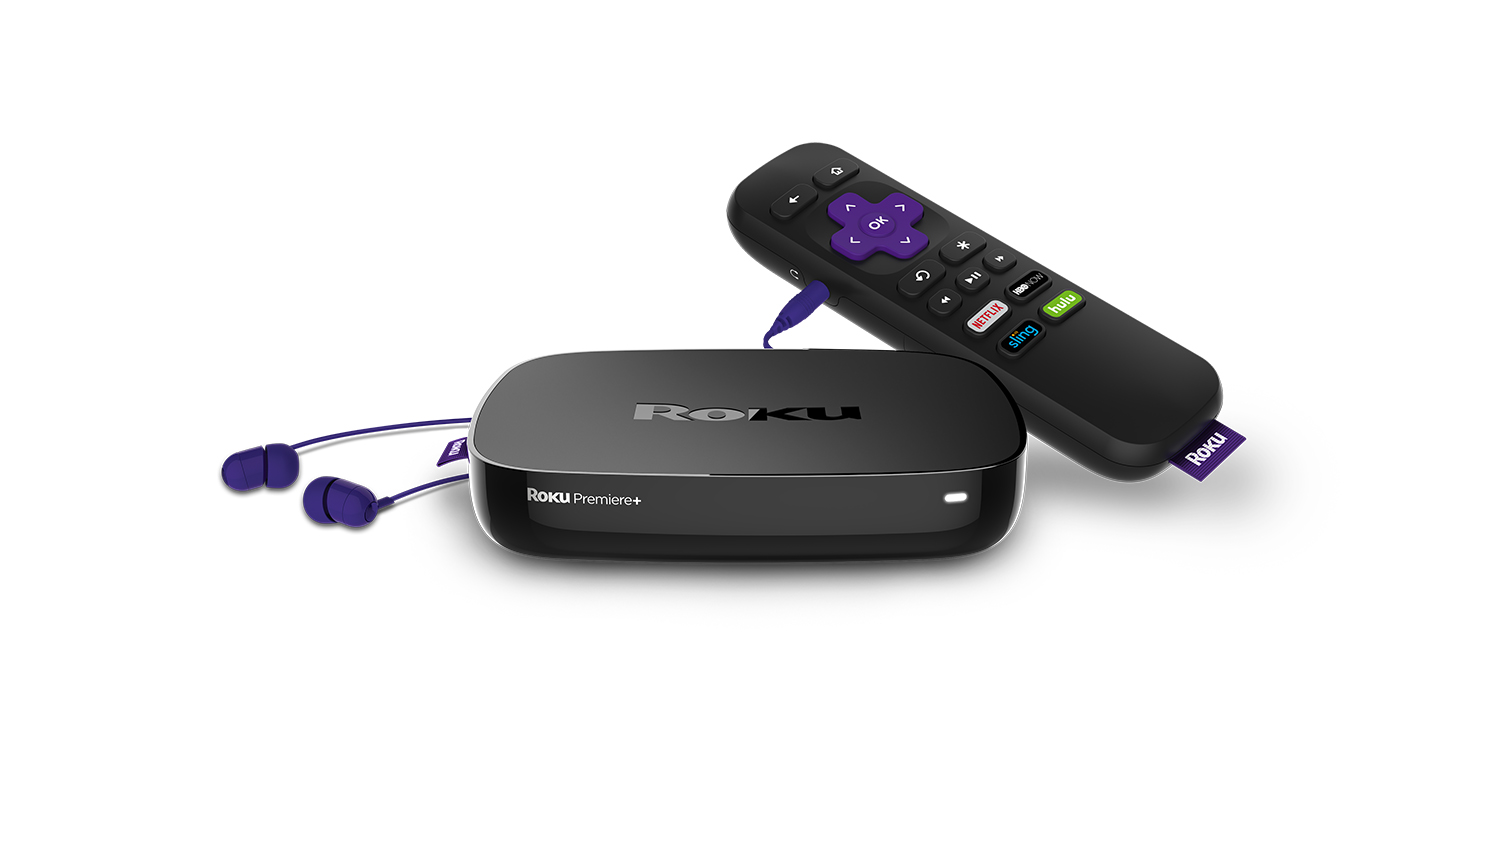 DIRECTV NOW Coming to Roku in The “Next Few Weeks”